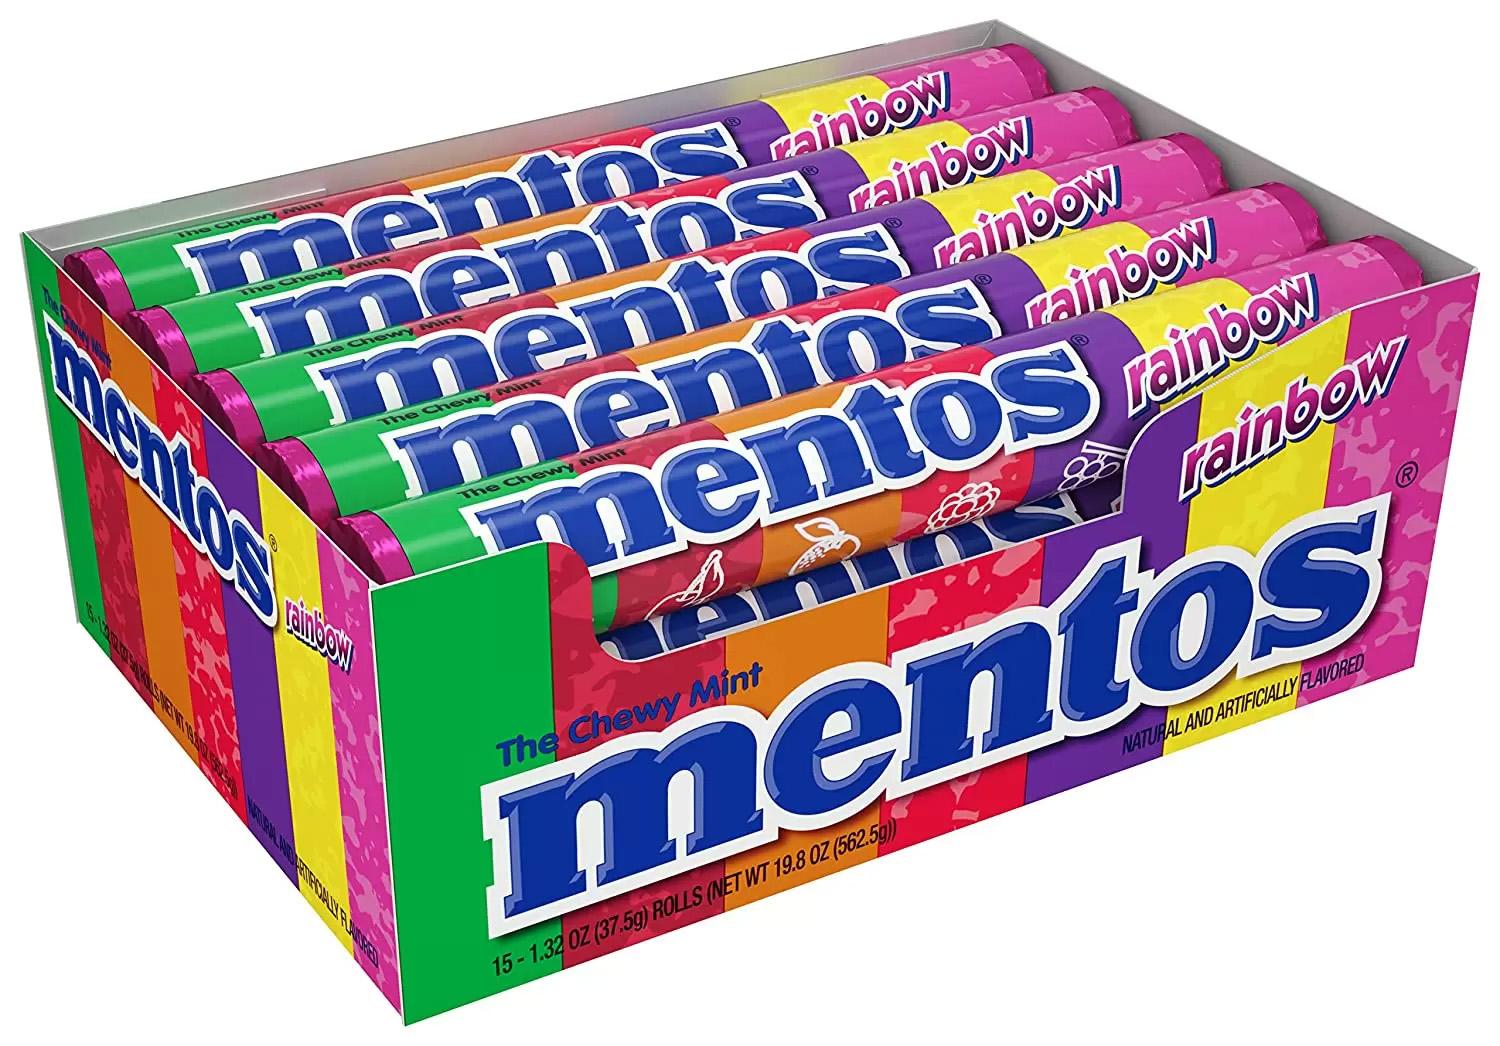 15 Mentos Rainbow Chewy Mint Candy Roll for $6.76 Shipped